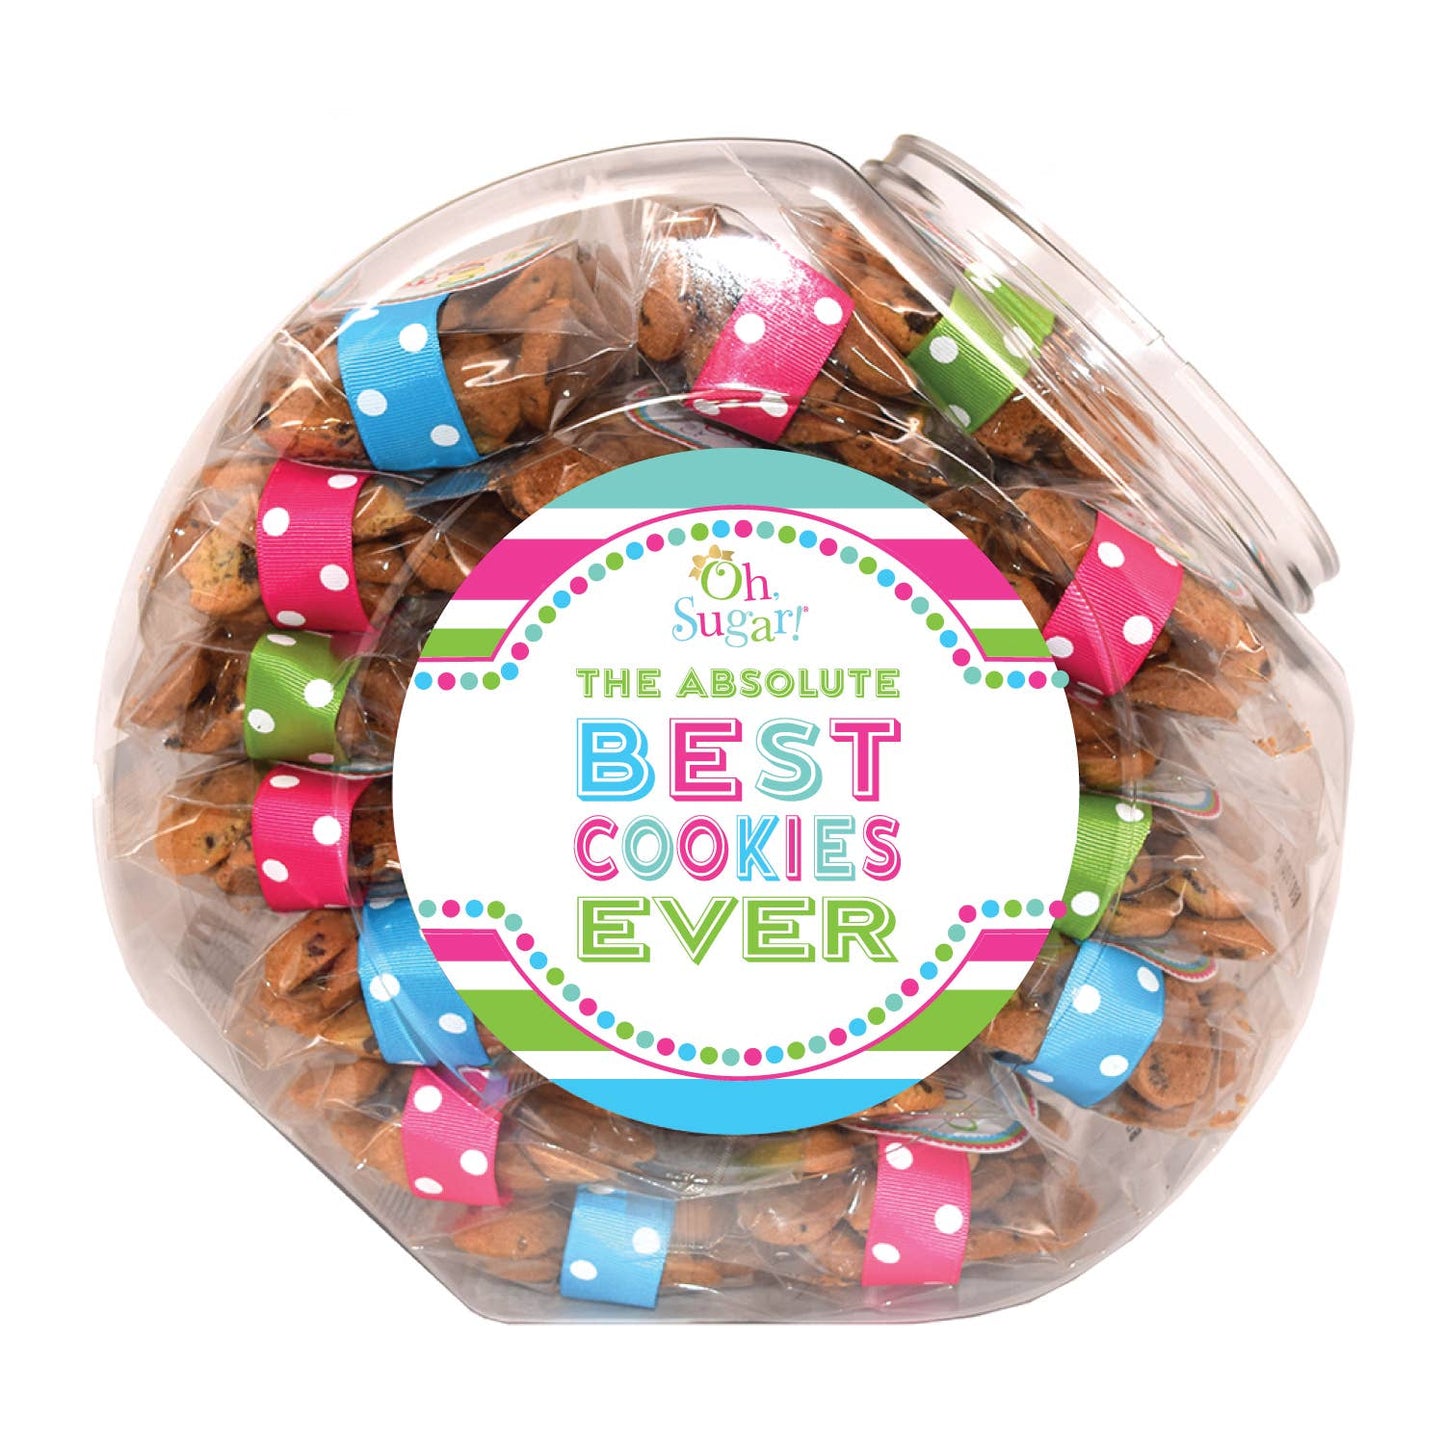 Cookie Tub - Everyday Mixed Flavor Bags: Four Assorted Flavors - 3 Jars each flavor